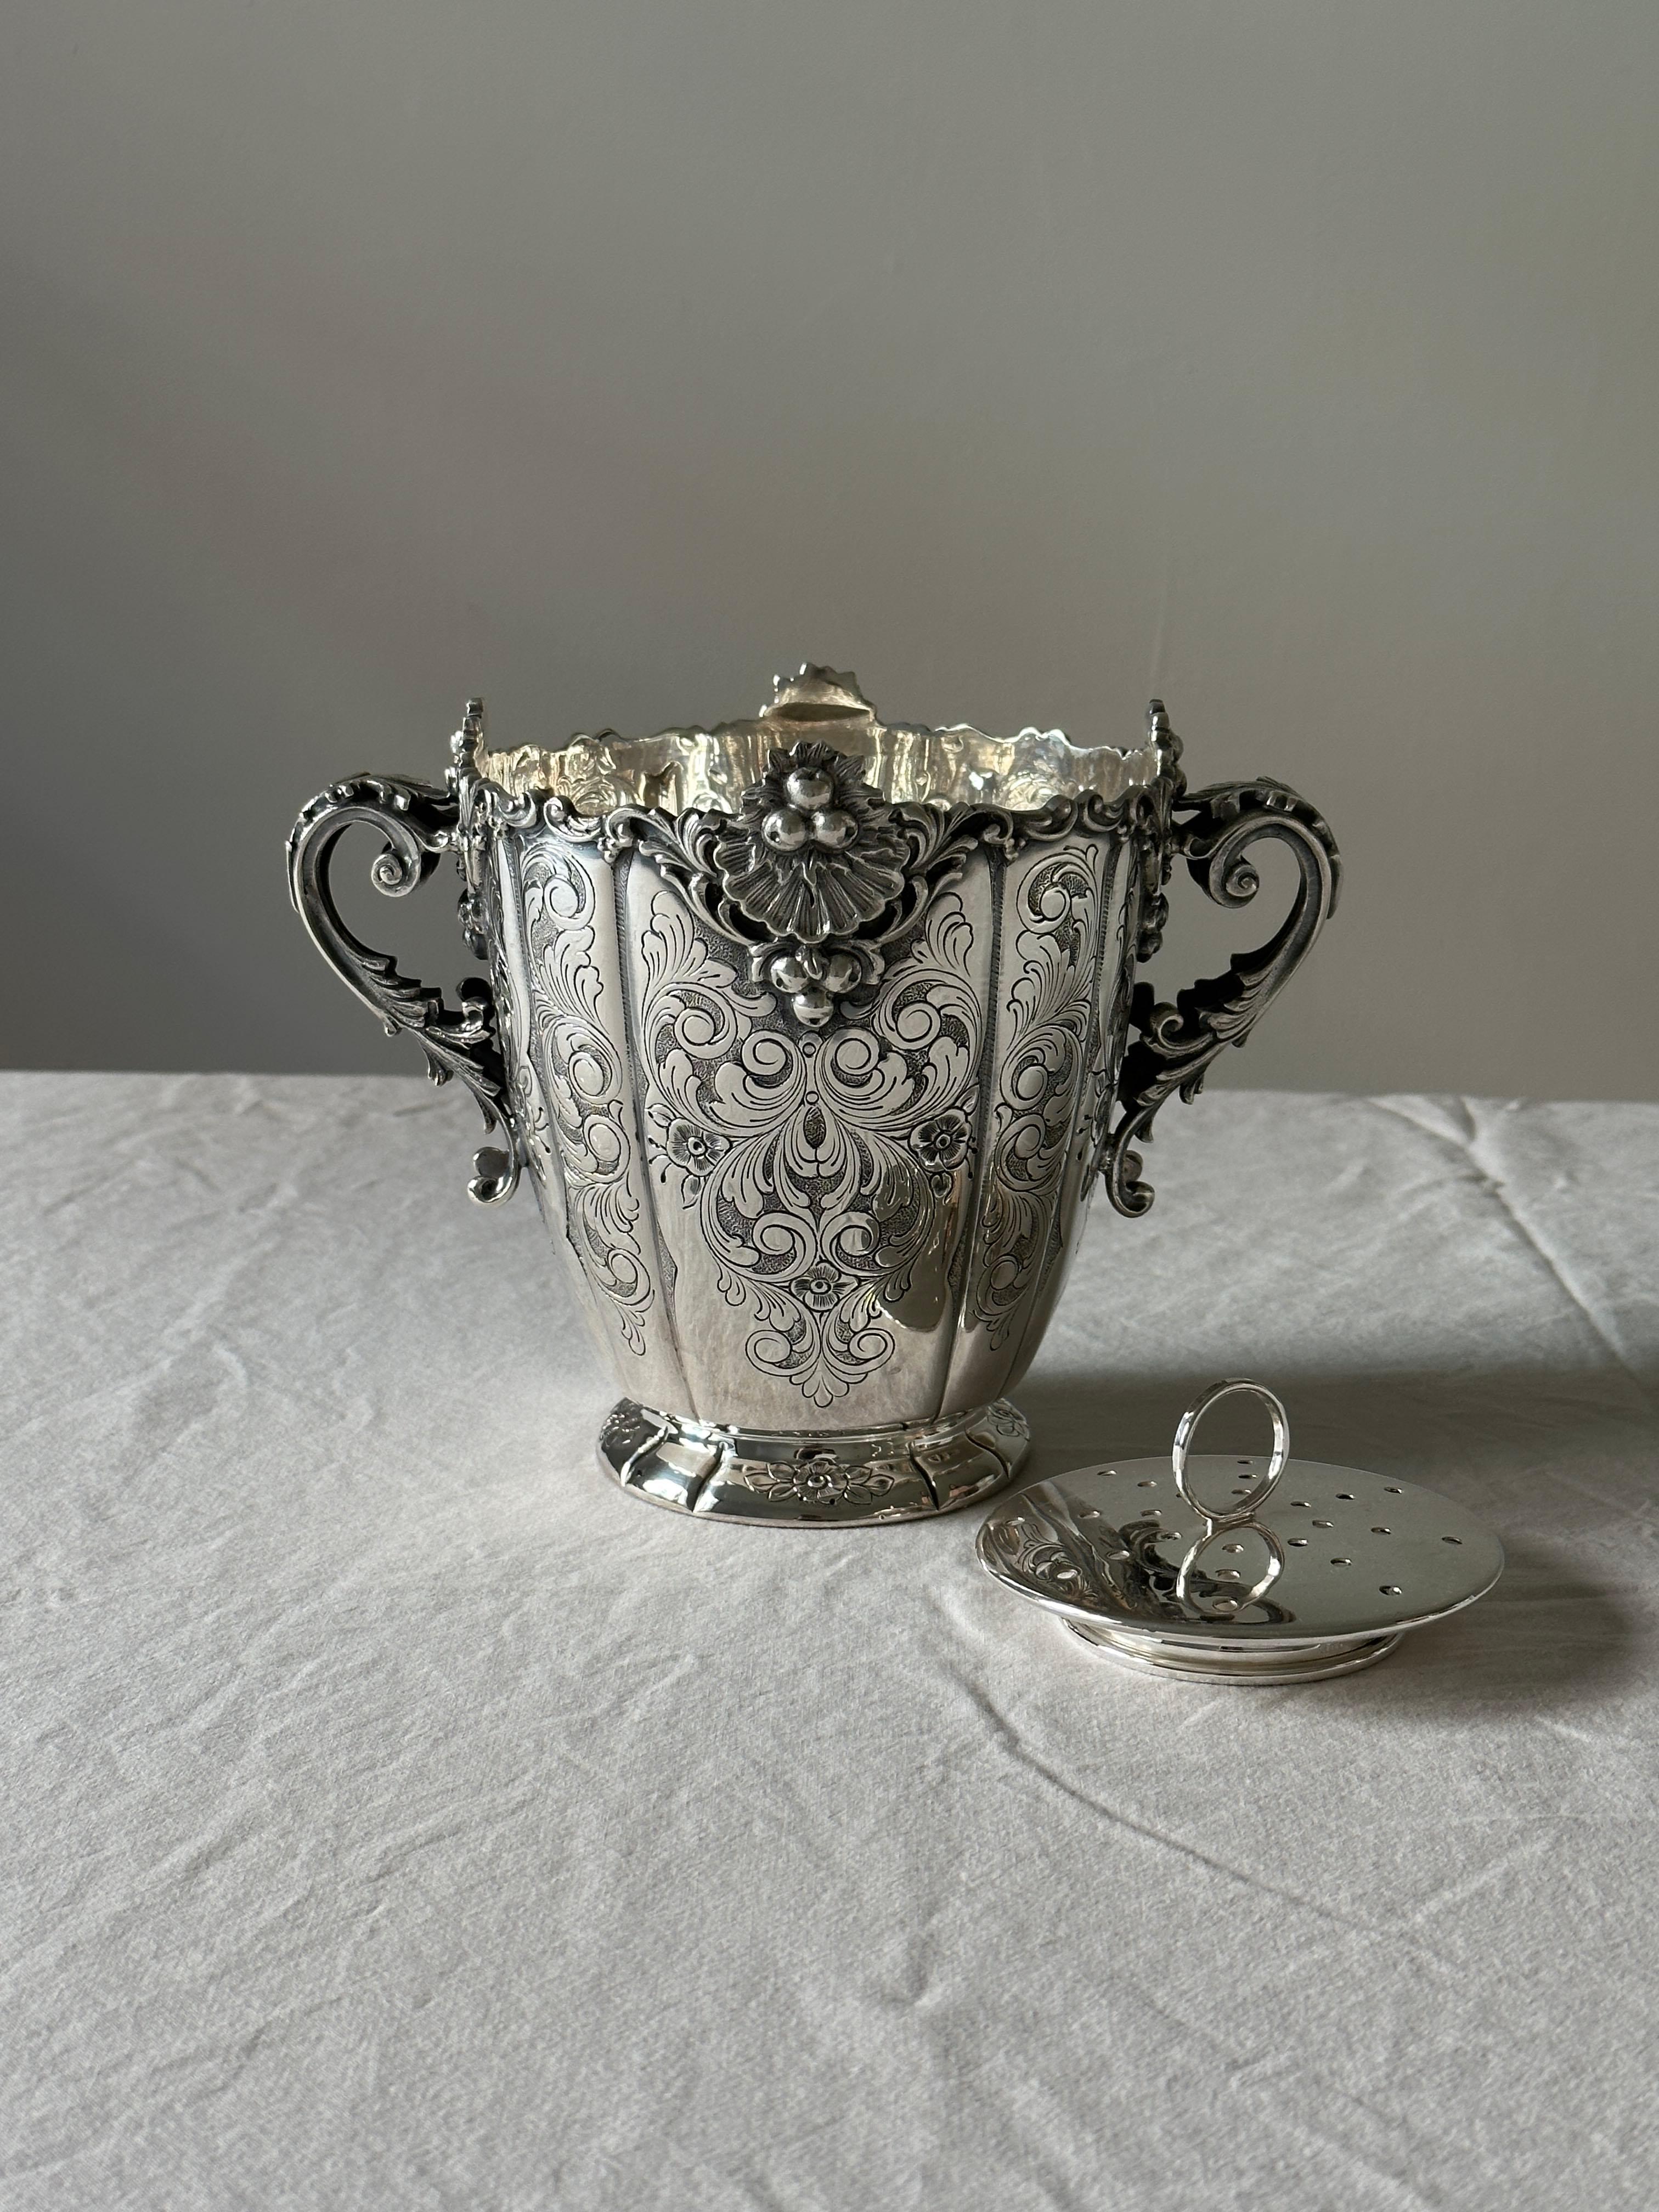 An Ilario Pradella repoussé sterling silver ice bucket, Milan, late 20th century (1960/69). Pradella was known for his exceptional work with Buccellati. Stamped on underside 988 grams.